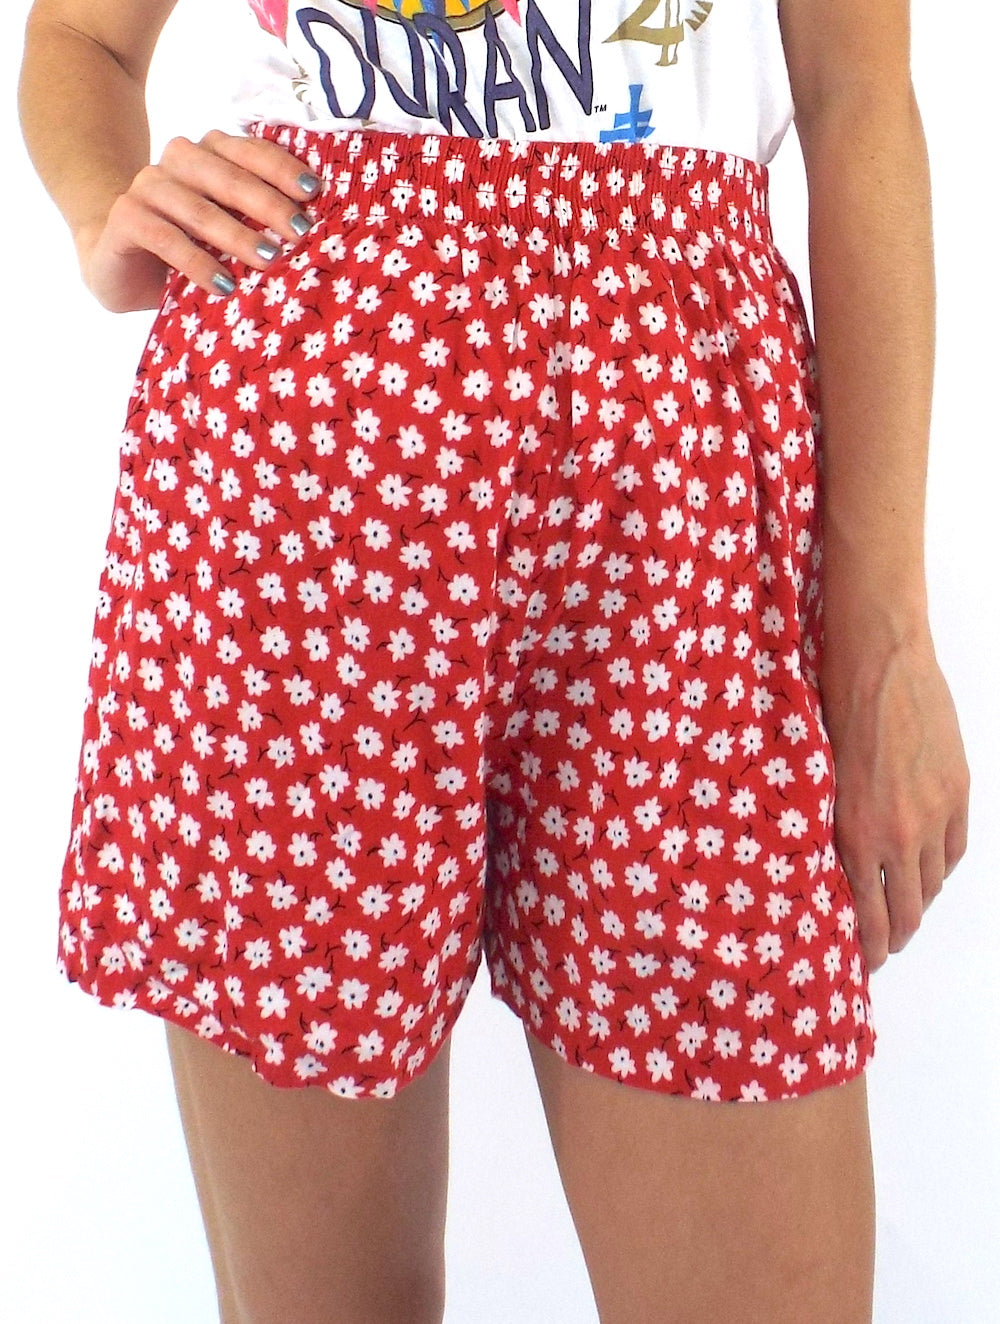 Vintage 90s High-Waisted Red Floral Print Soft Shorts